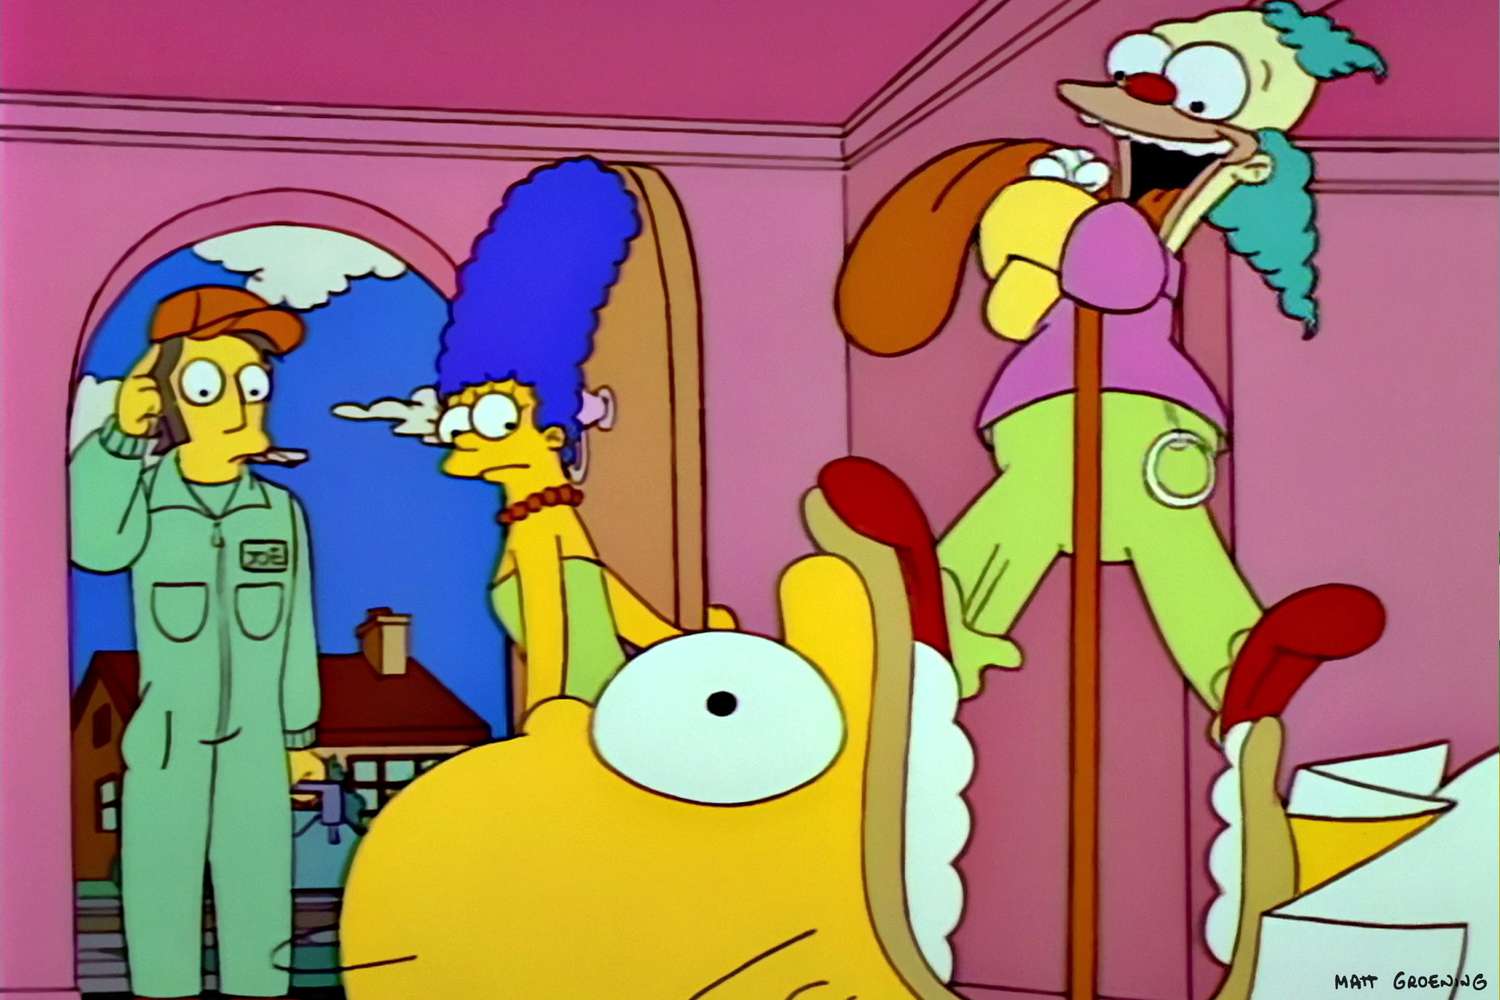 Future Simpsons Porn - The Simpsons Treehouse of Horror episodes, ranked | EW.com